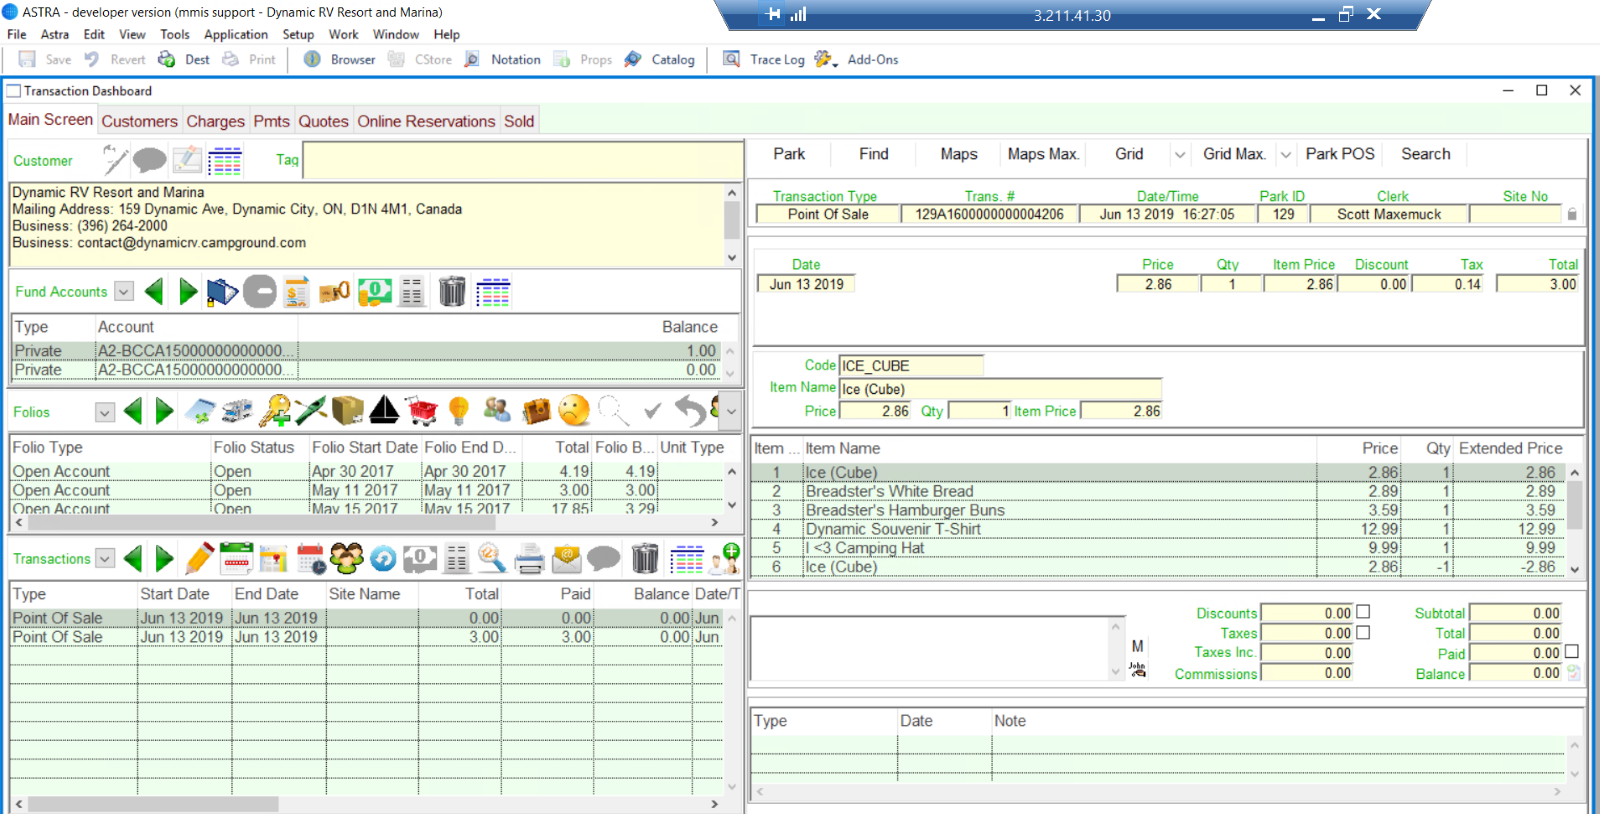 Graphical user interface, application, Excel

Description automatically generated